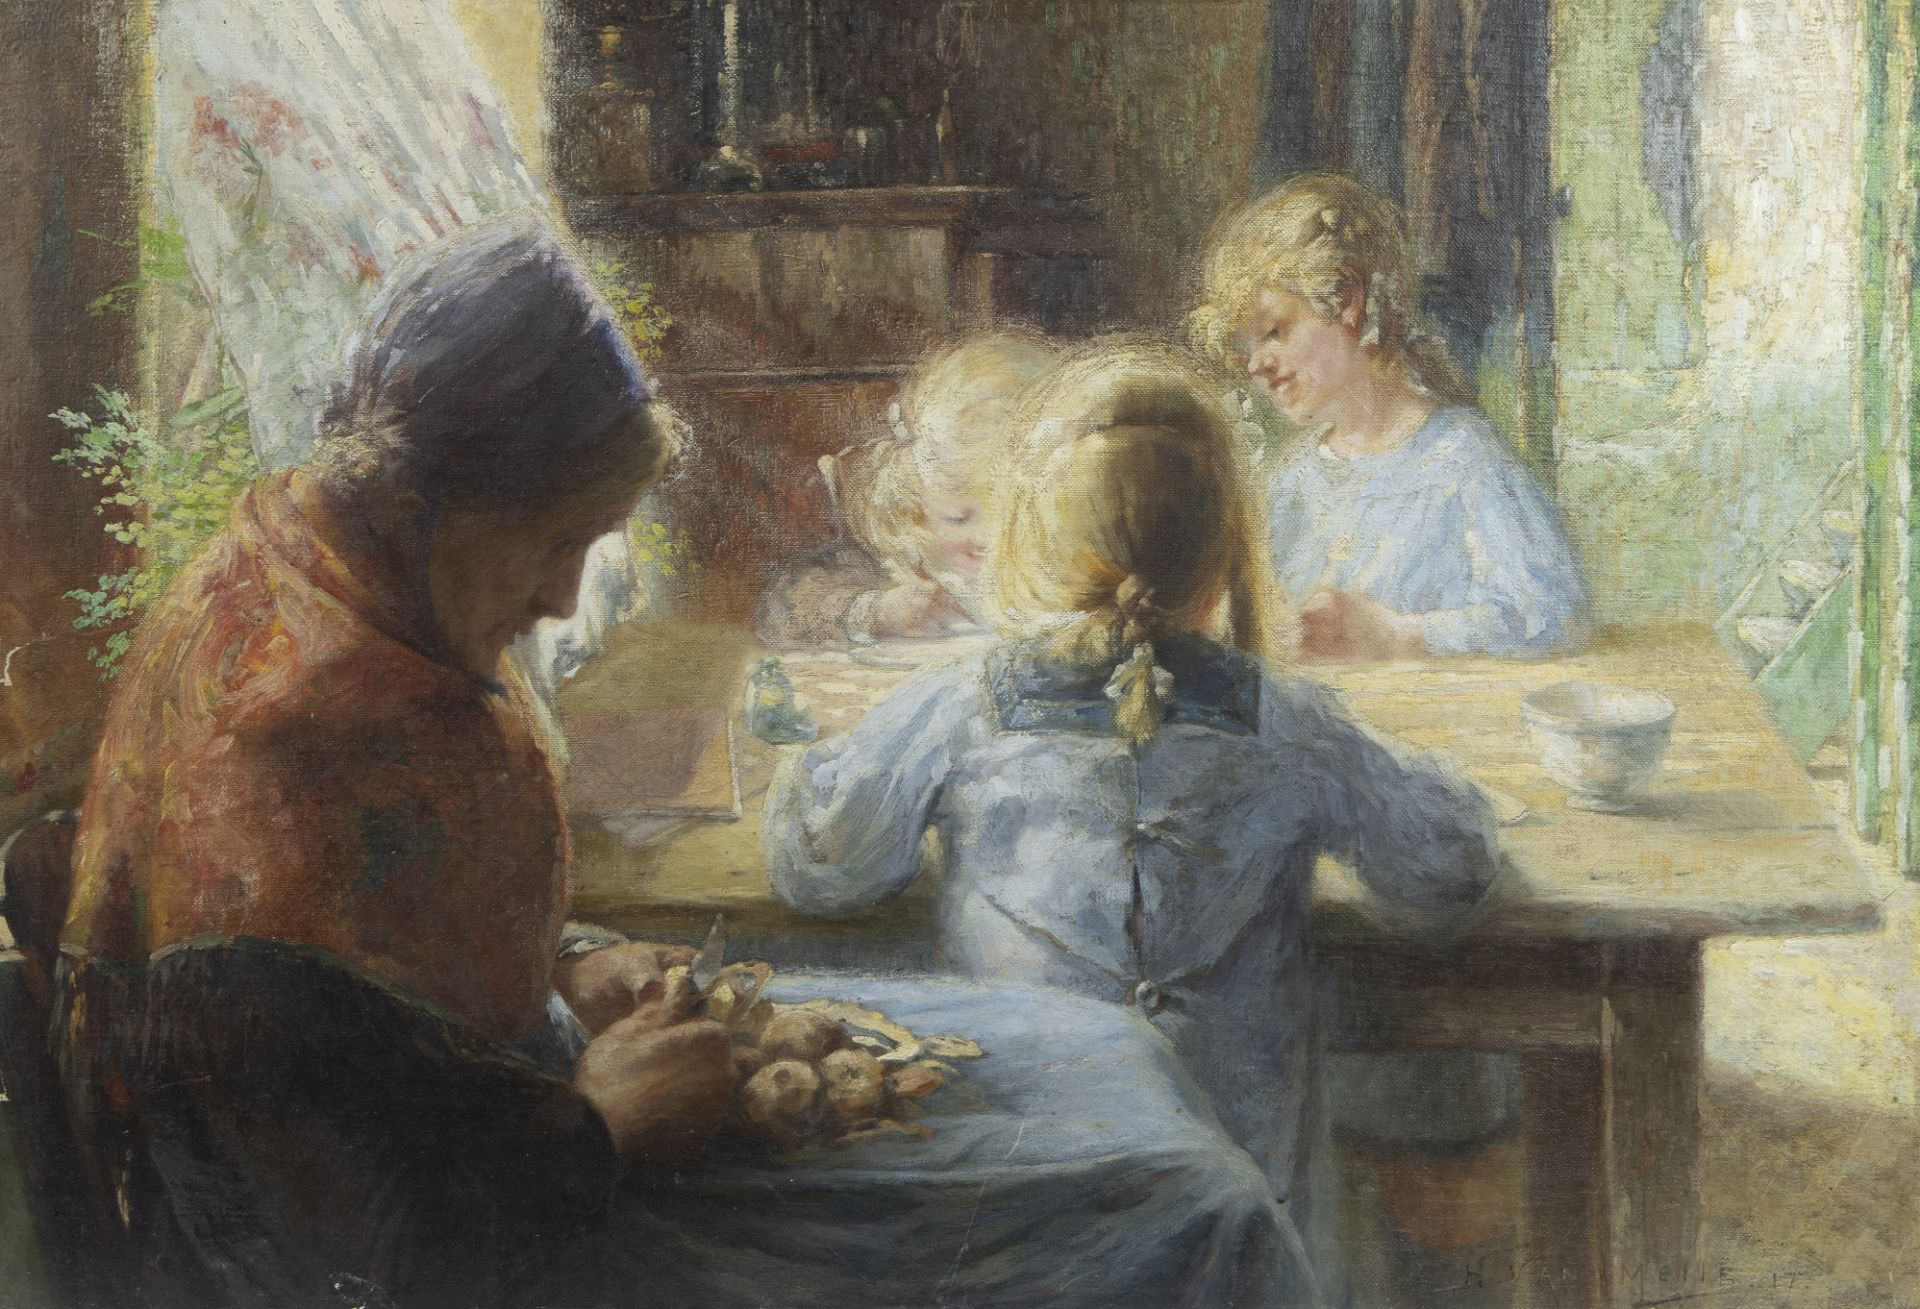 Henri VAN MELLE (1859-1930), oil on canvas Playing children at table, signed and dated '17